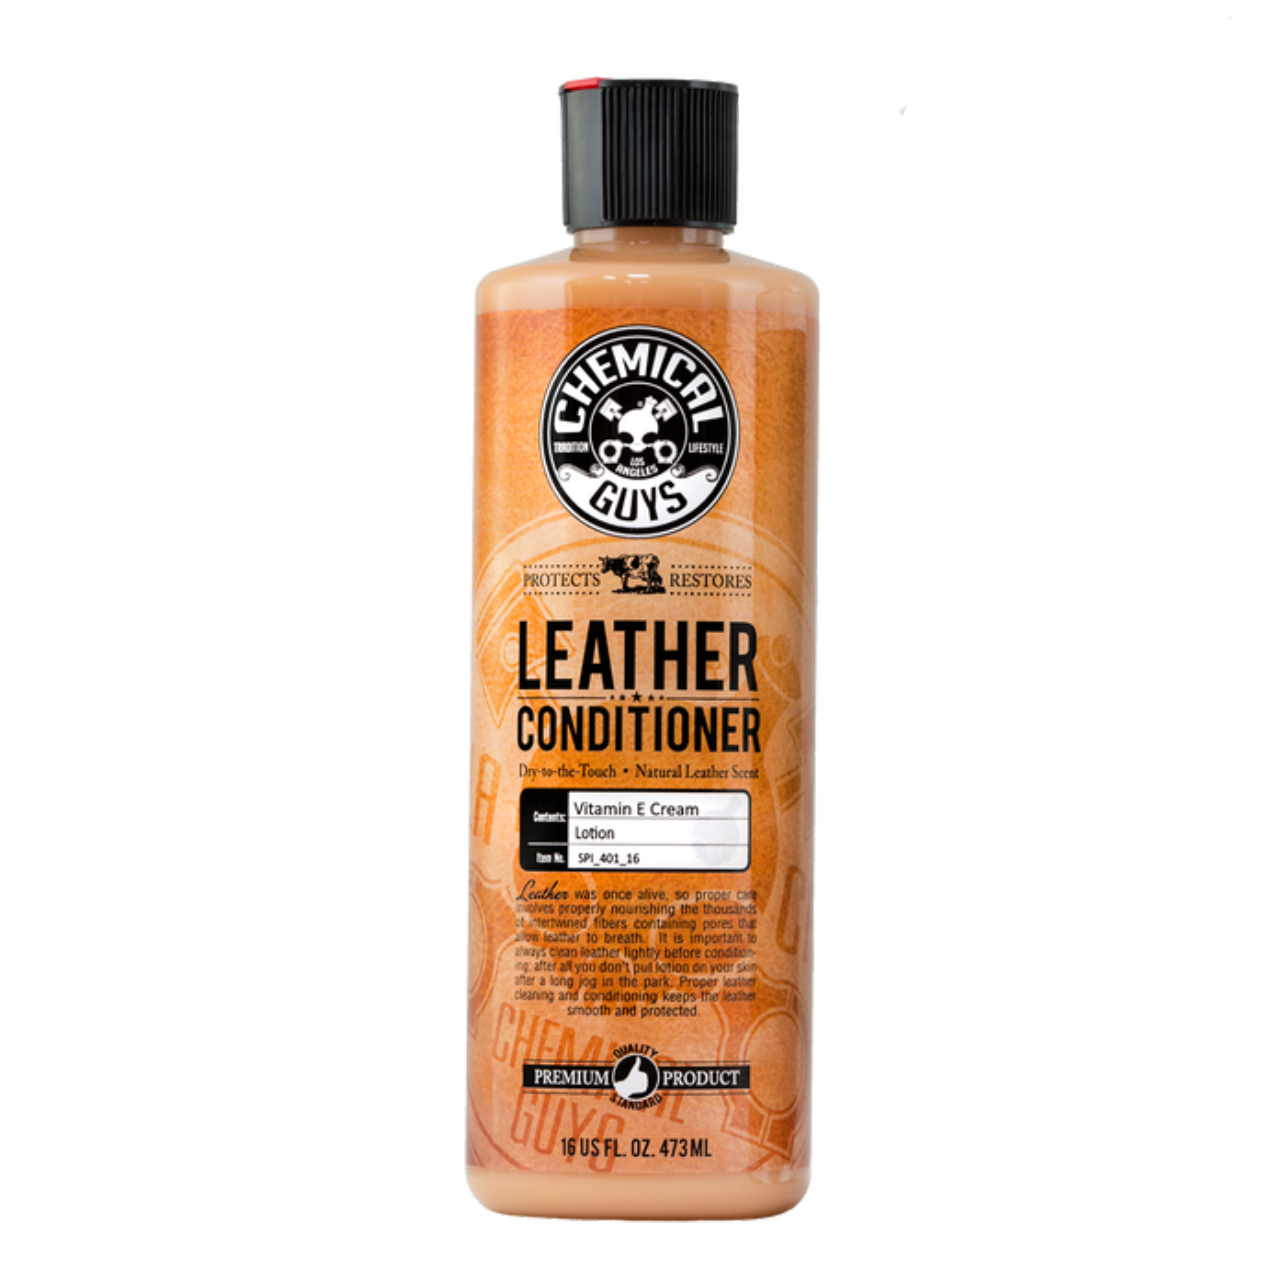 Chemical Guys Leather Conditioner 16 oz.